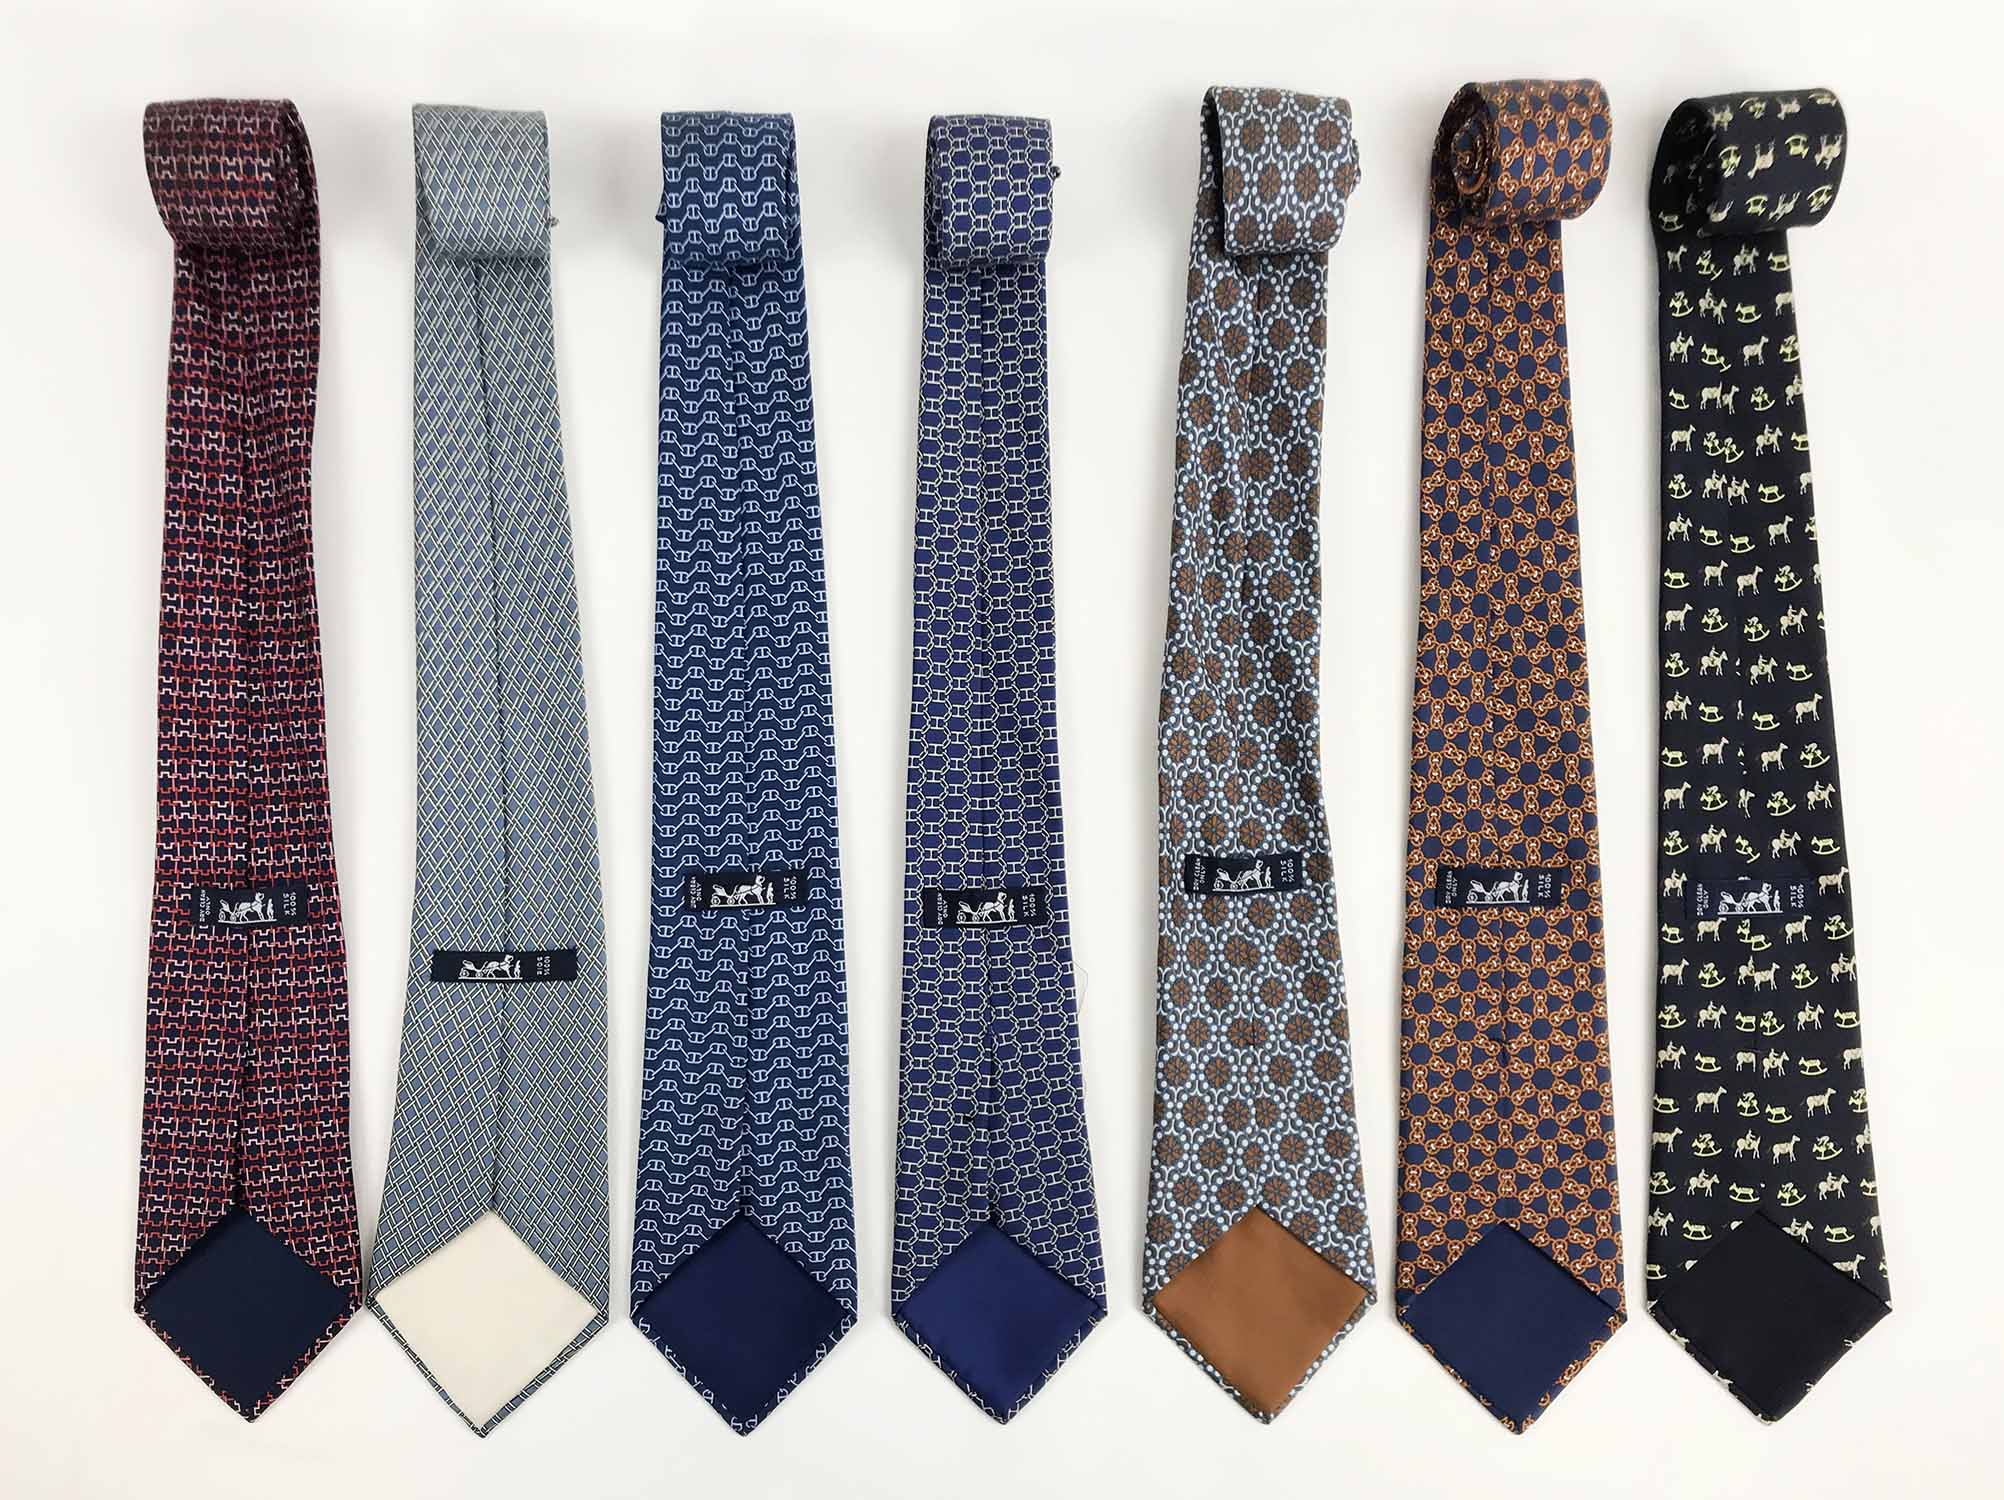 HERMÈS TIES, a collection of seven patterned silk ties. (7)